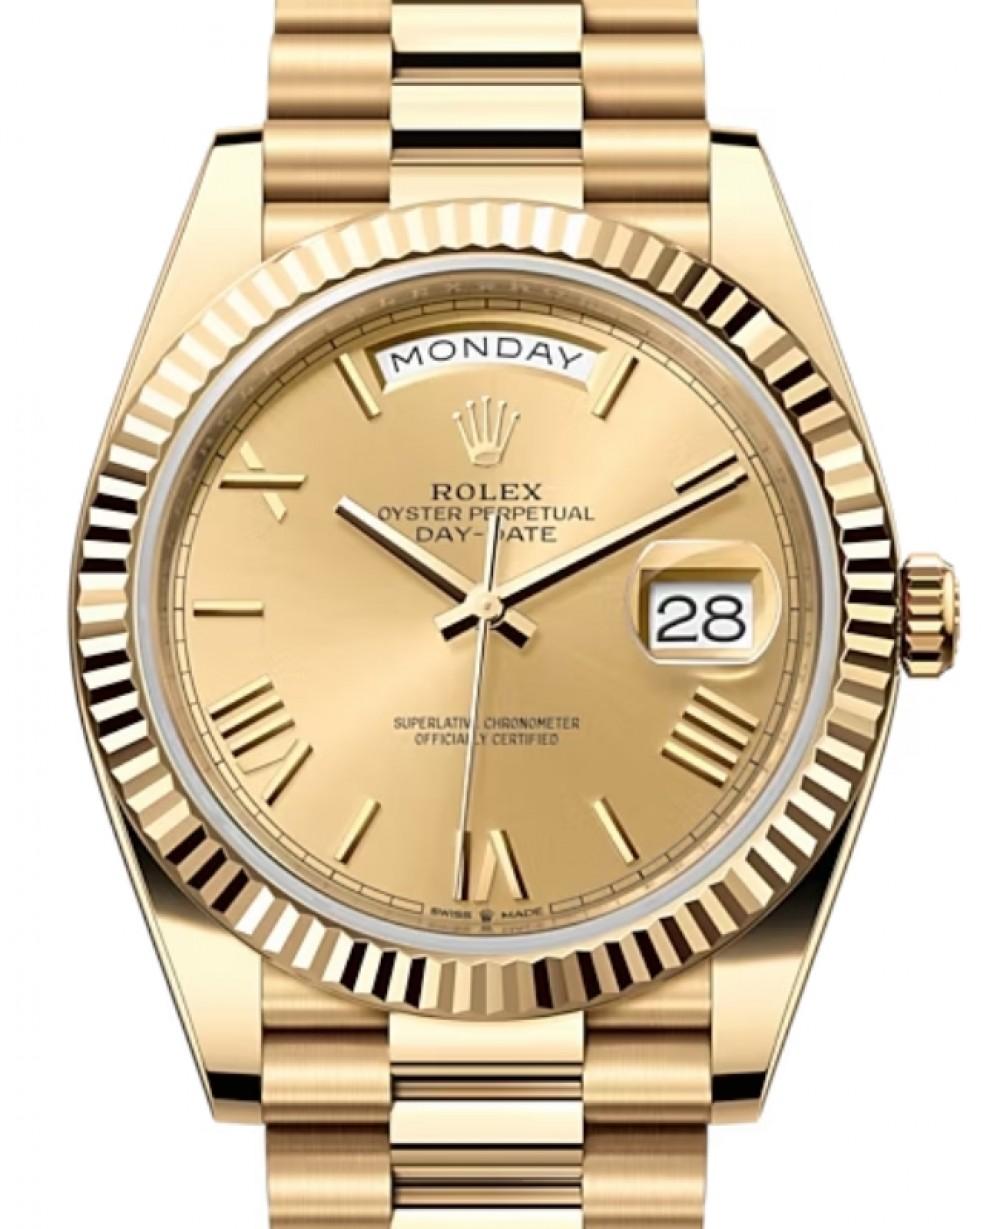 2023 Card. Comes with the original box and paper full set. 5-year Rolex manufactured warranty.

* Free Shipping within the USA
* 5-year warranty coverage
* 14-day return policy with a full refund. Buyers can verify the watch's authenticity at any